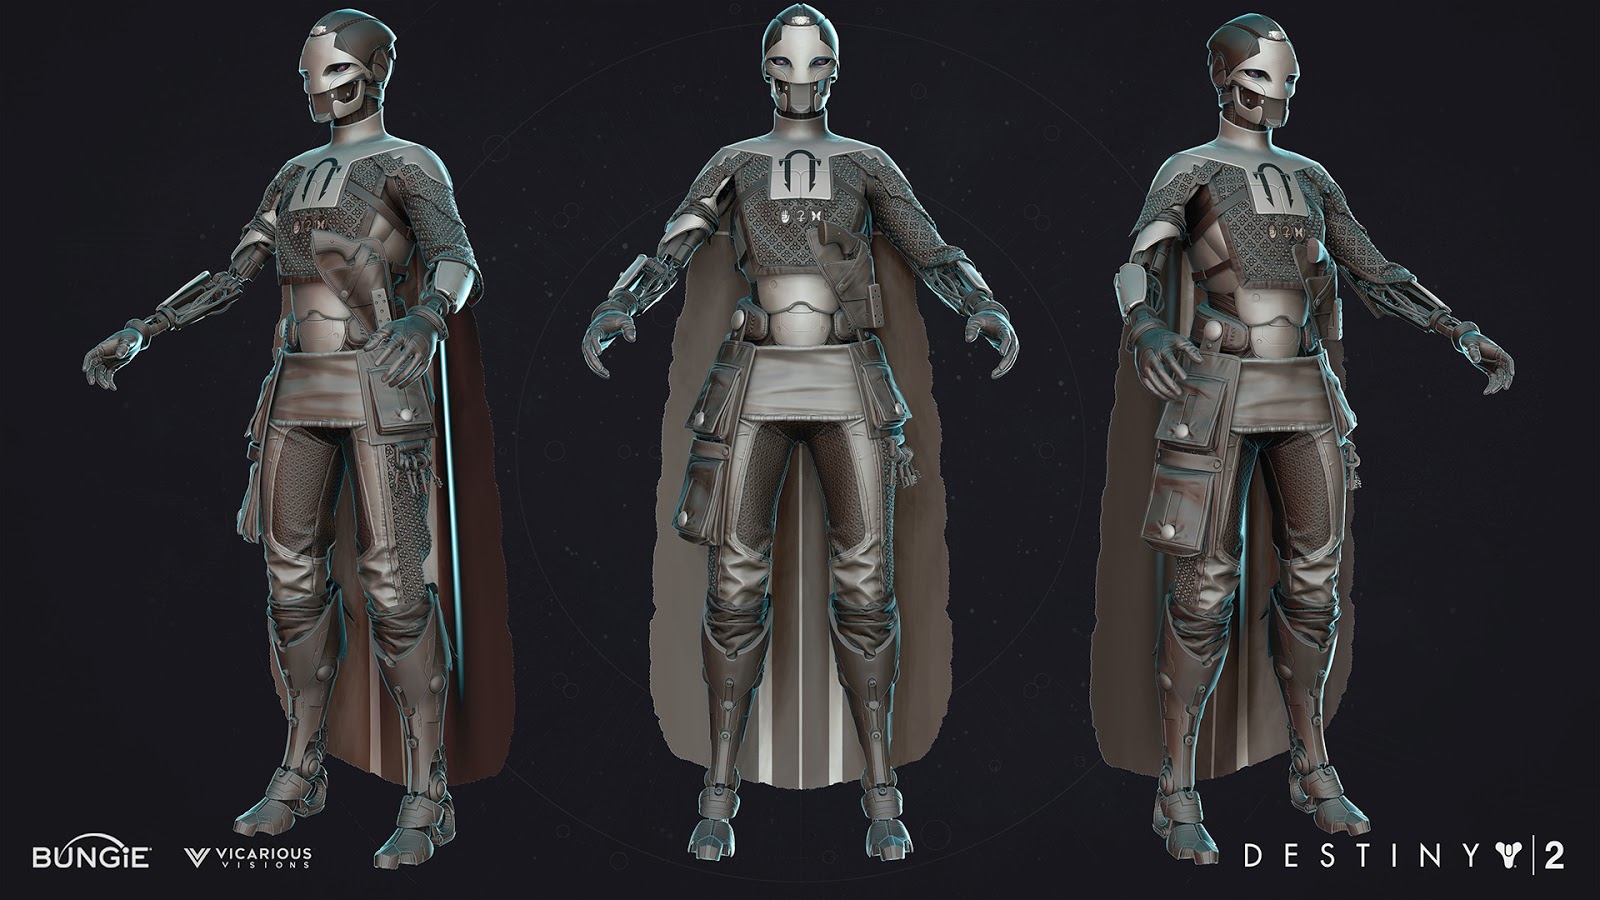 I'm going to be modeling a bust of an early iteration of the Destiny 2...